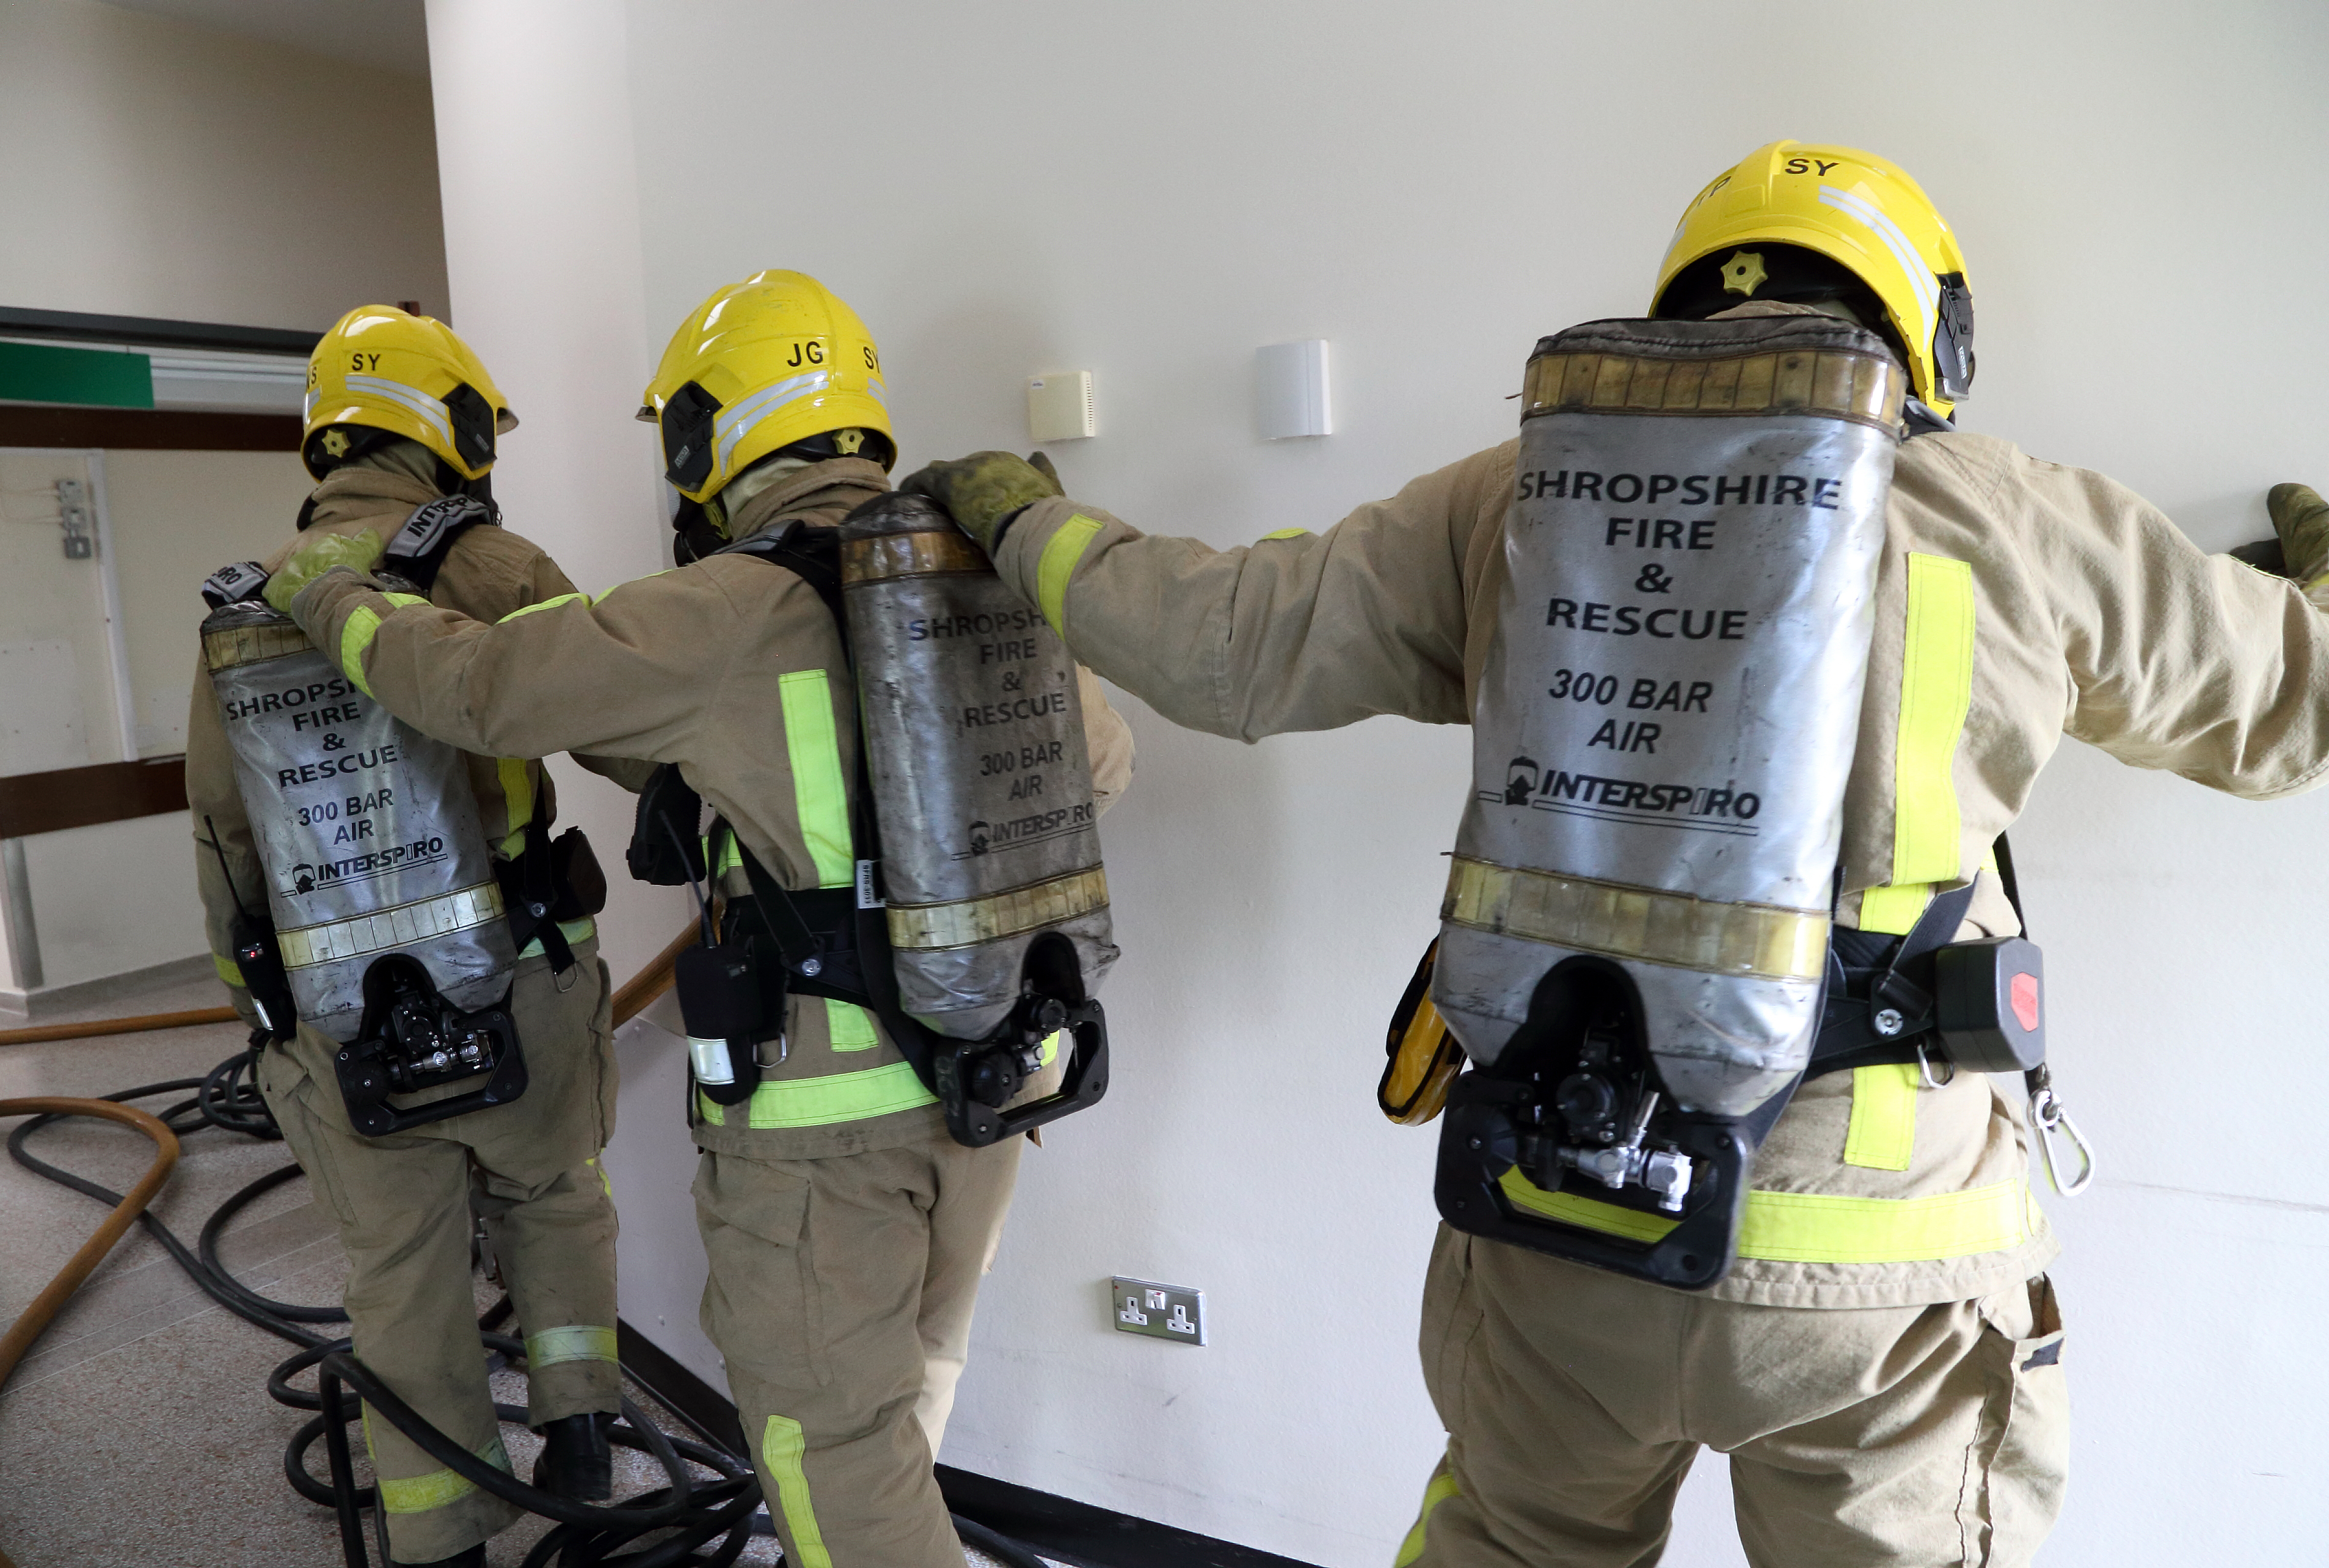 Shropshire firefighters train to search and rescue casualties in a training exercise at Royal Shrewsbury Hospital.